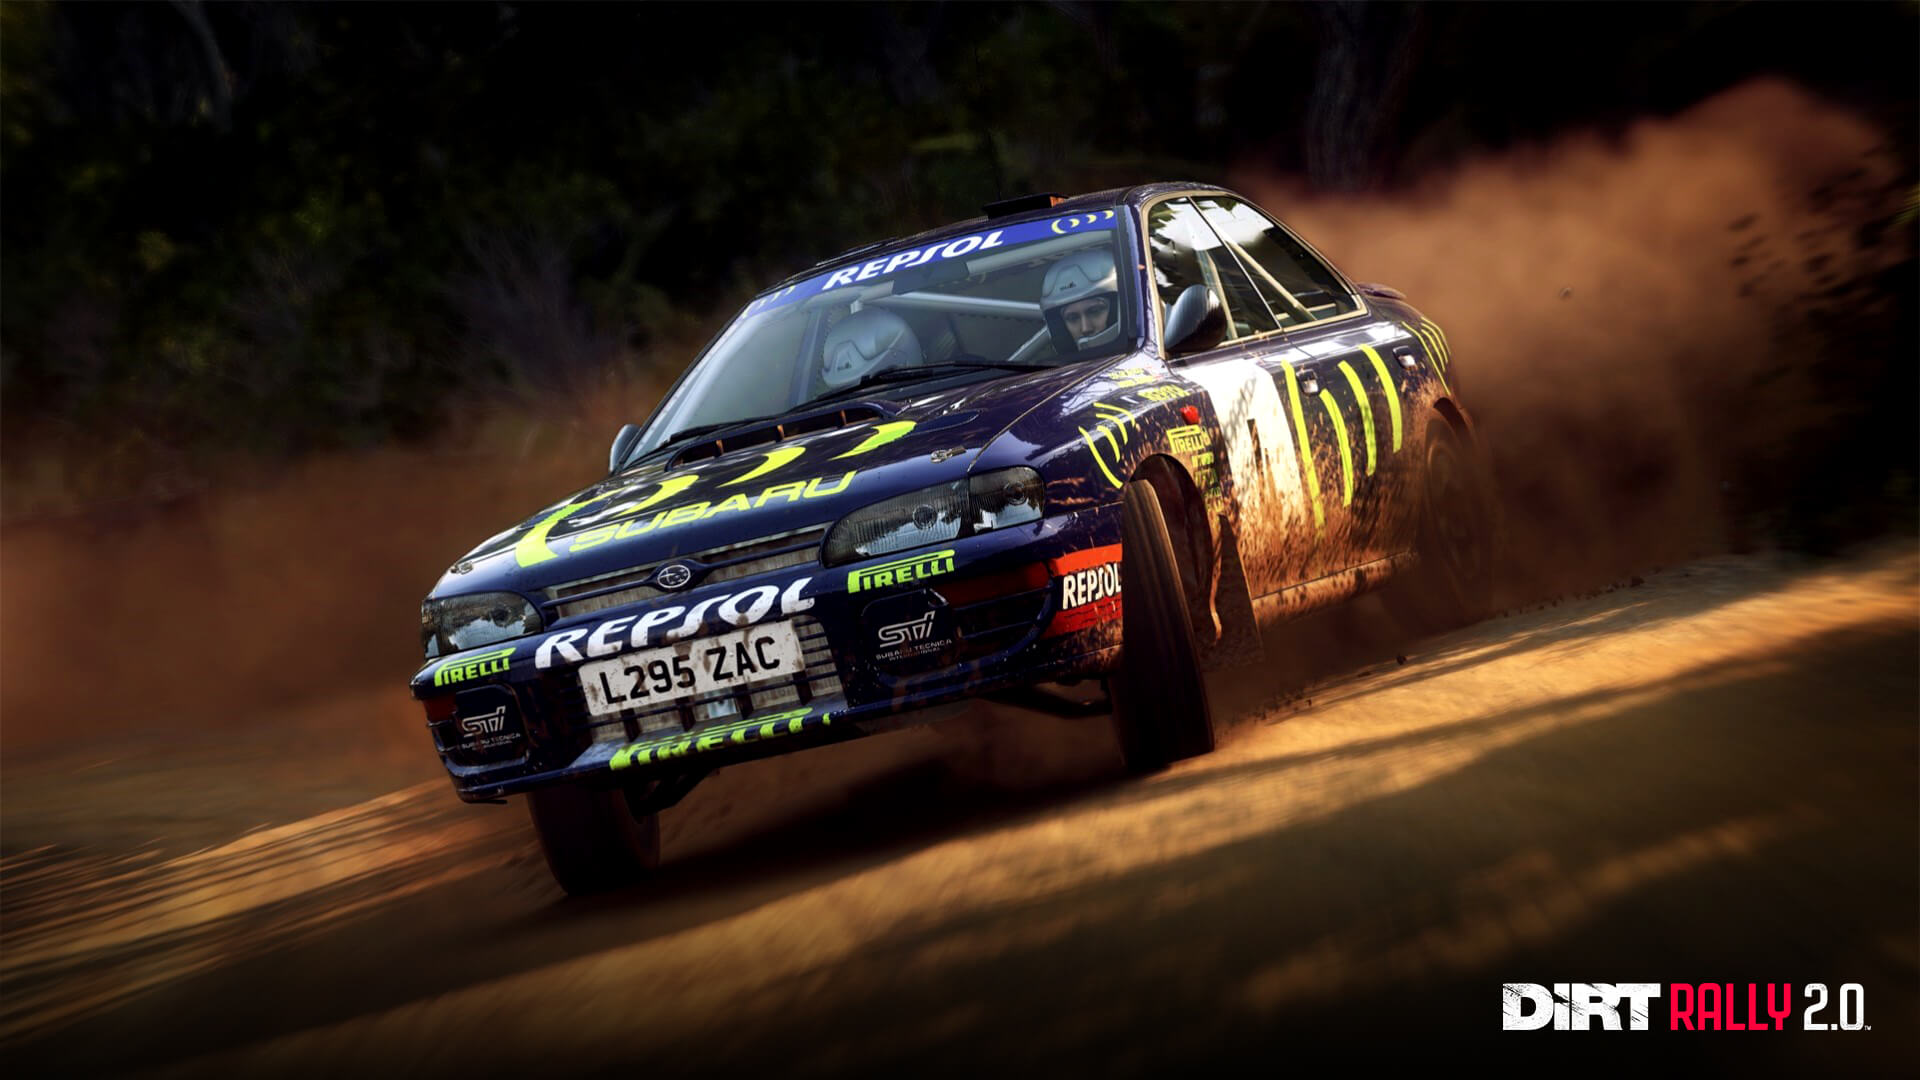 Final DiRT Rally 2.0 Update 1.18 Released - ORD